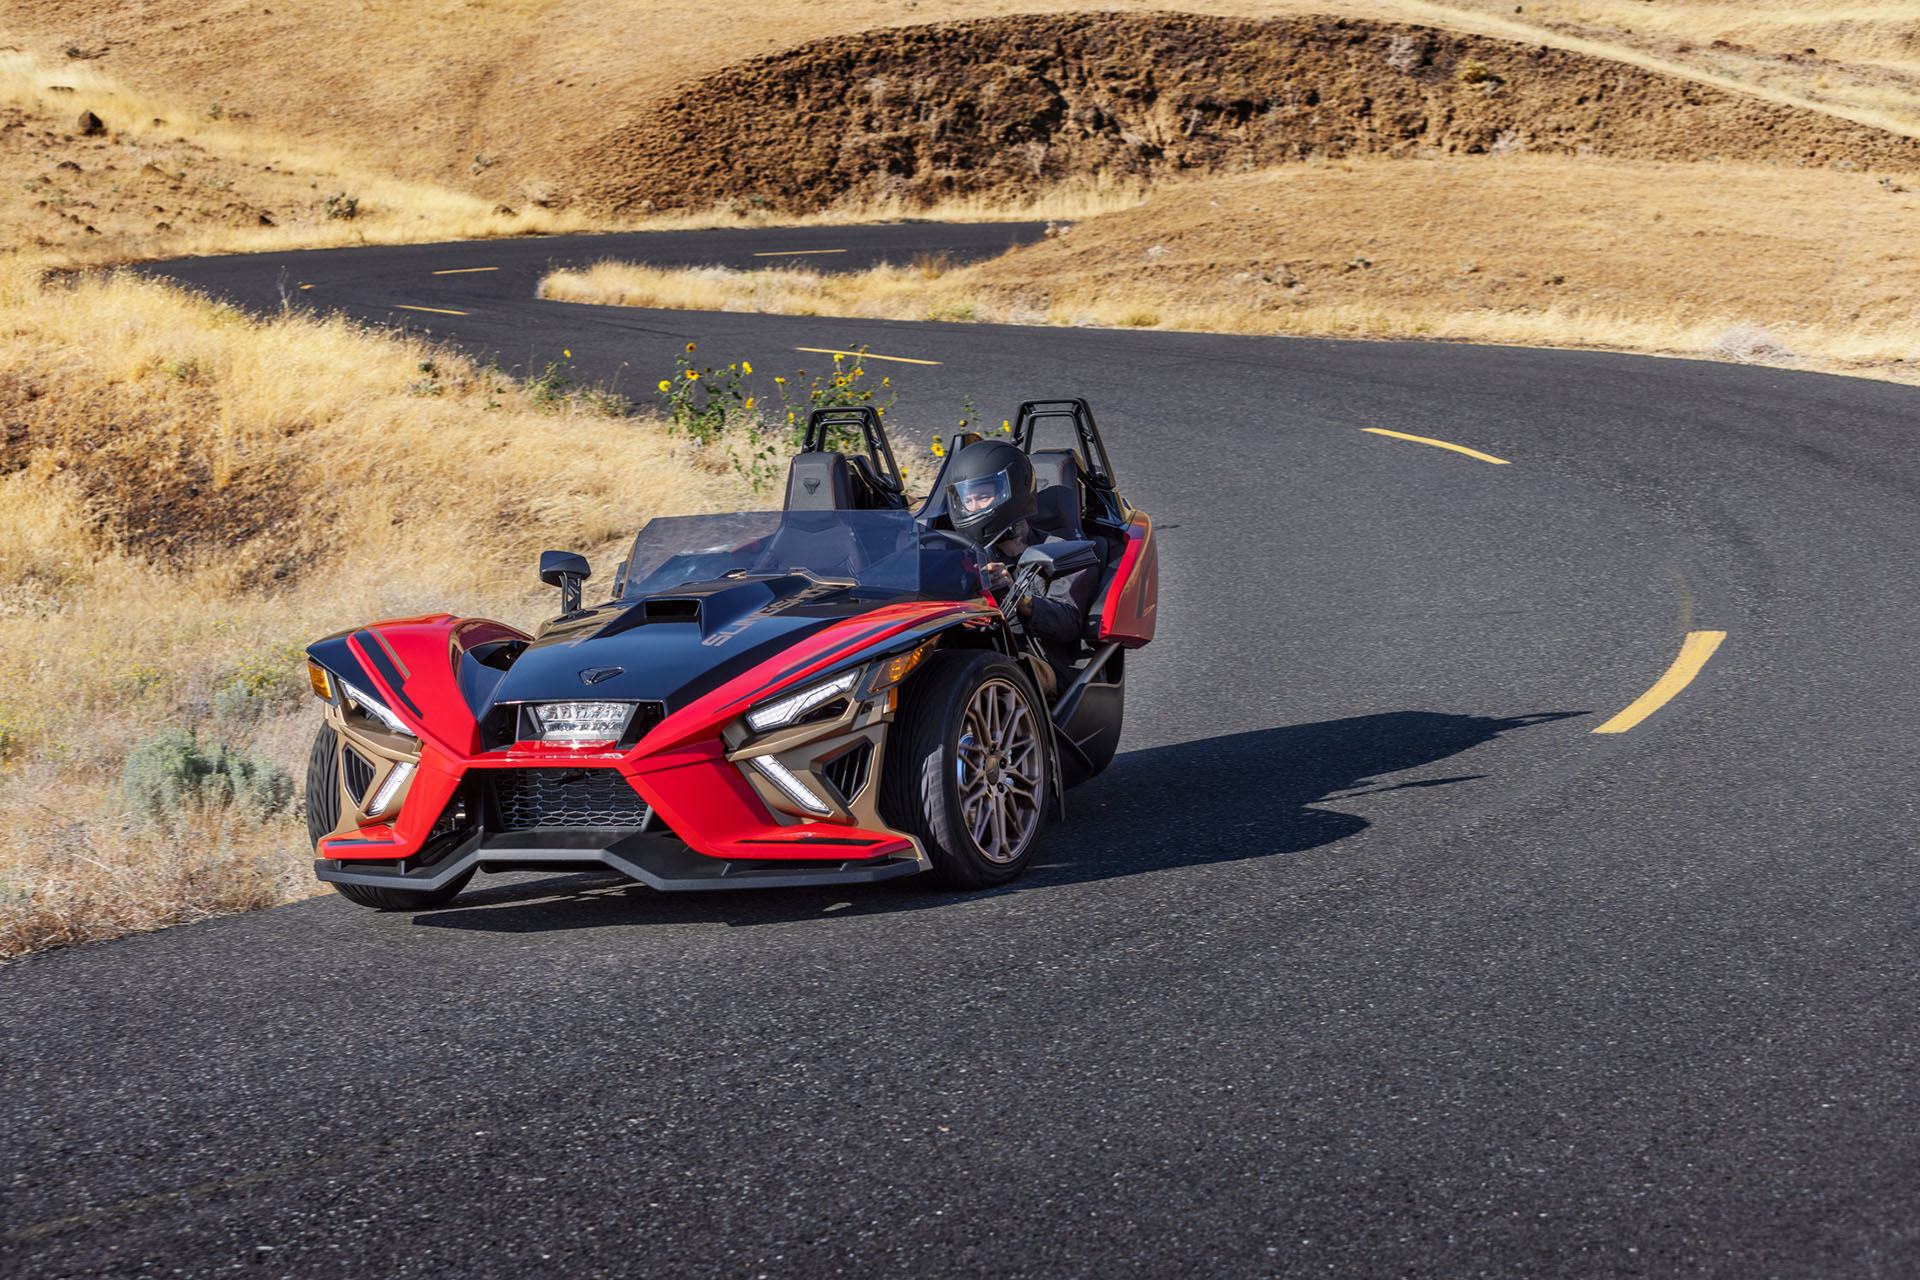 2022 Slingshot Signature Limited Edition AutoDrive in High Point, North Carolina - Photo 5